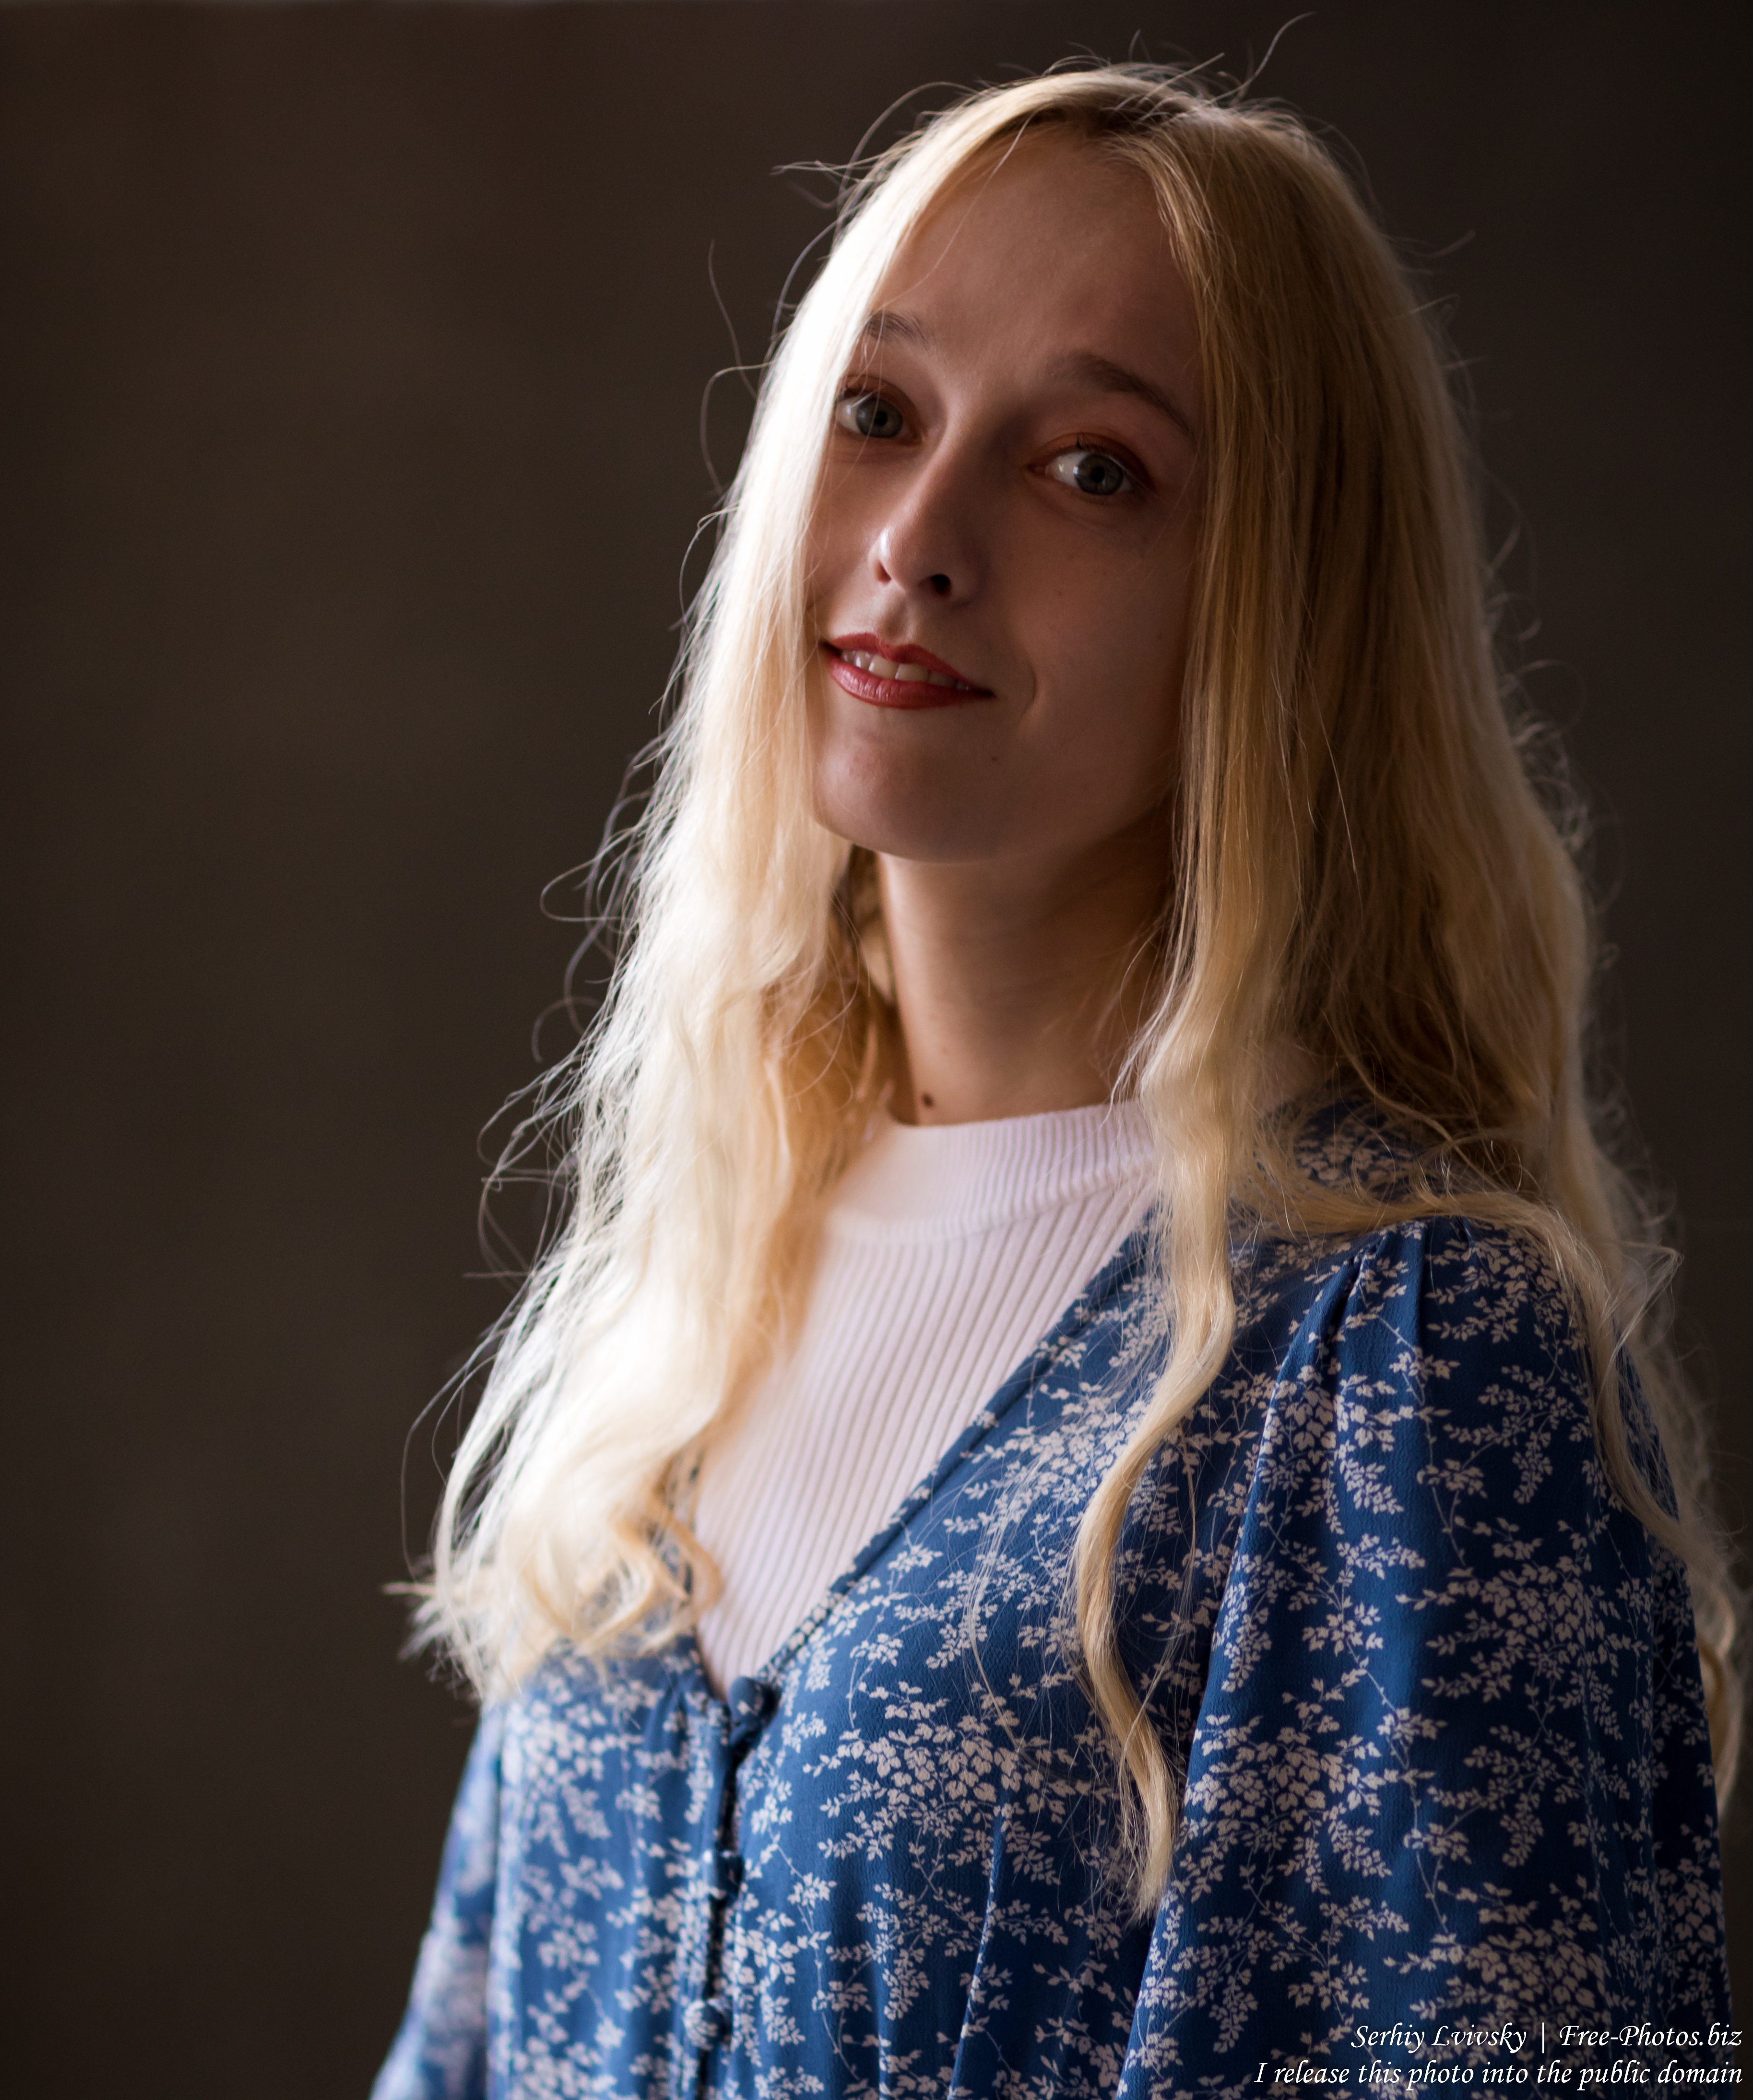 Sonya - a 21-year-old natural blonde girl photographed in July 2019 by Serhiy Lvivsky, picture 8